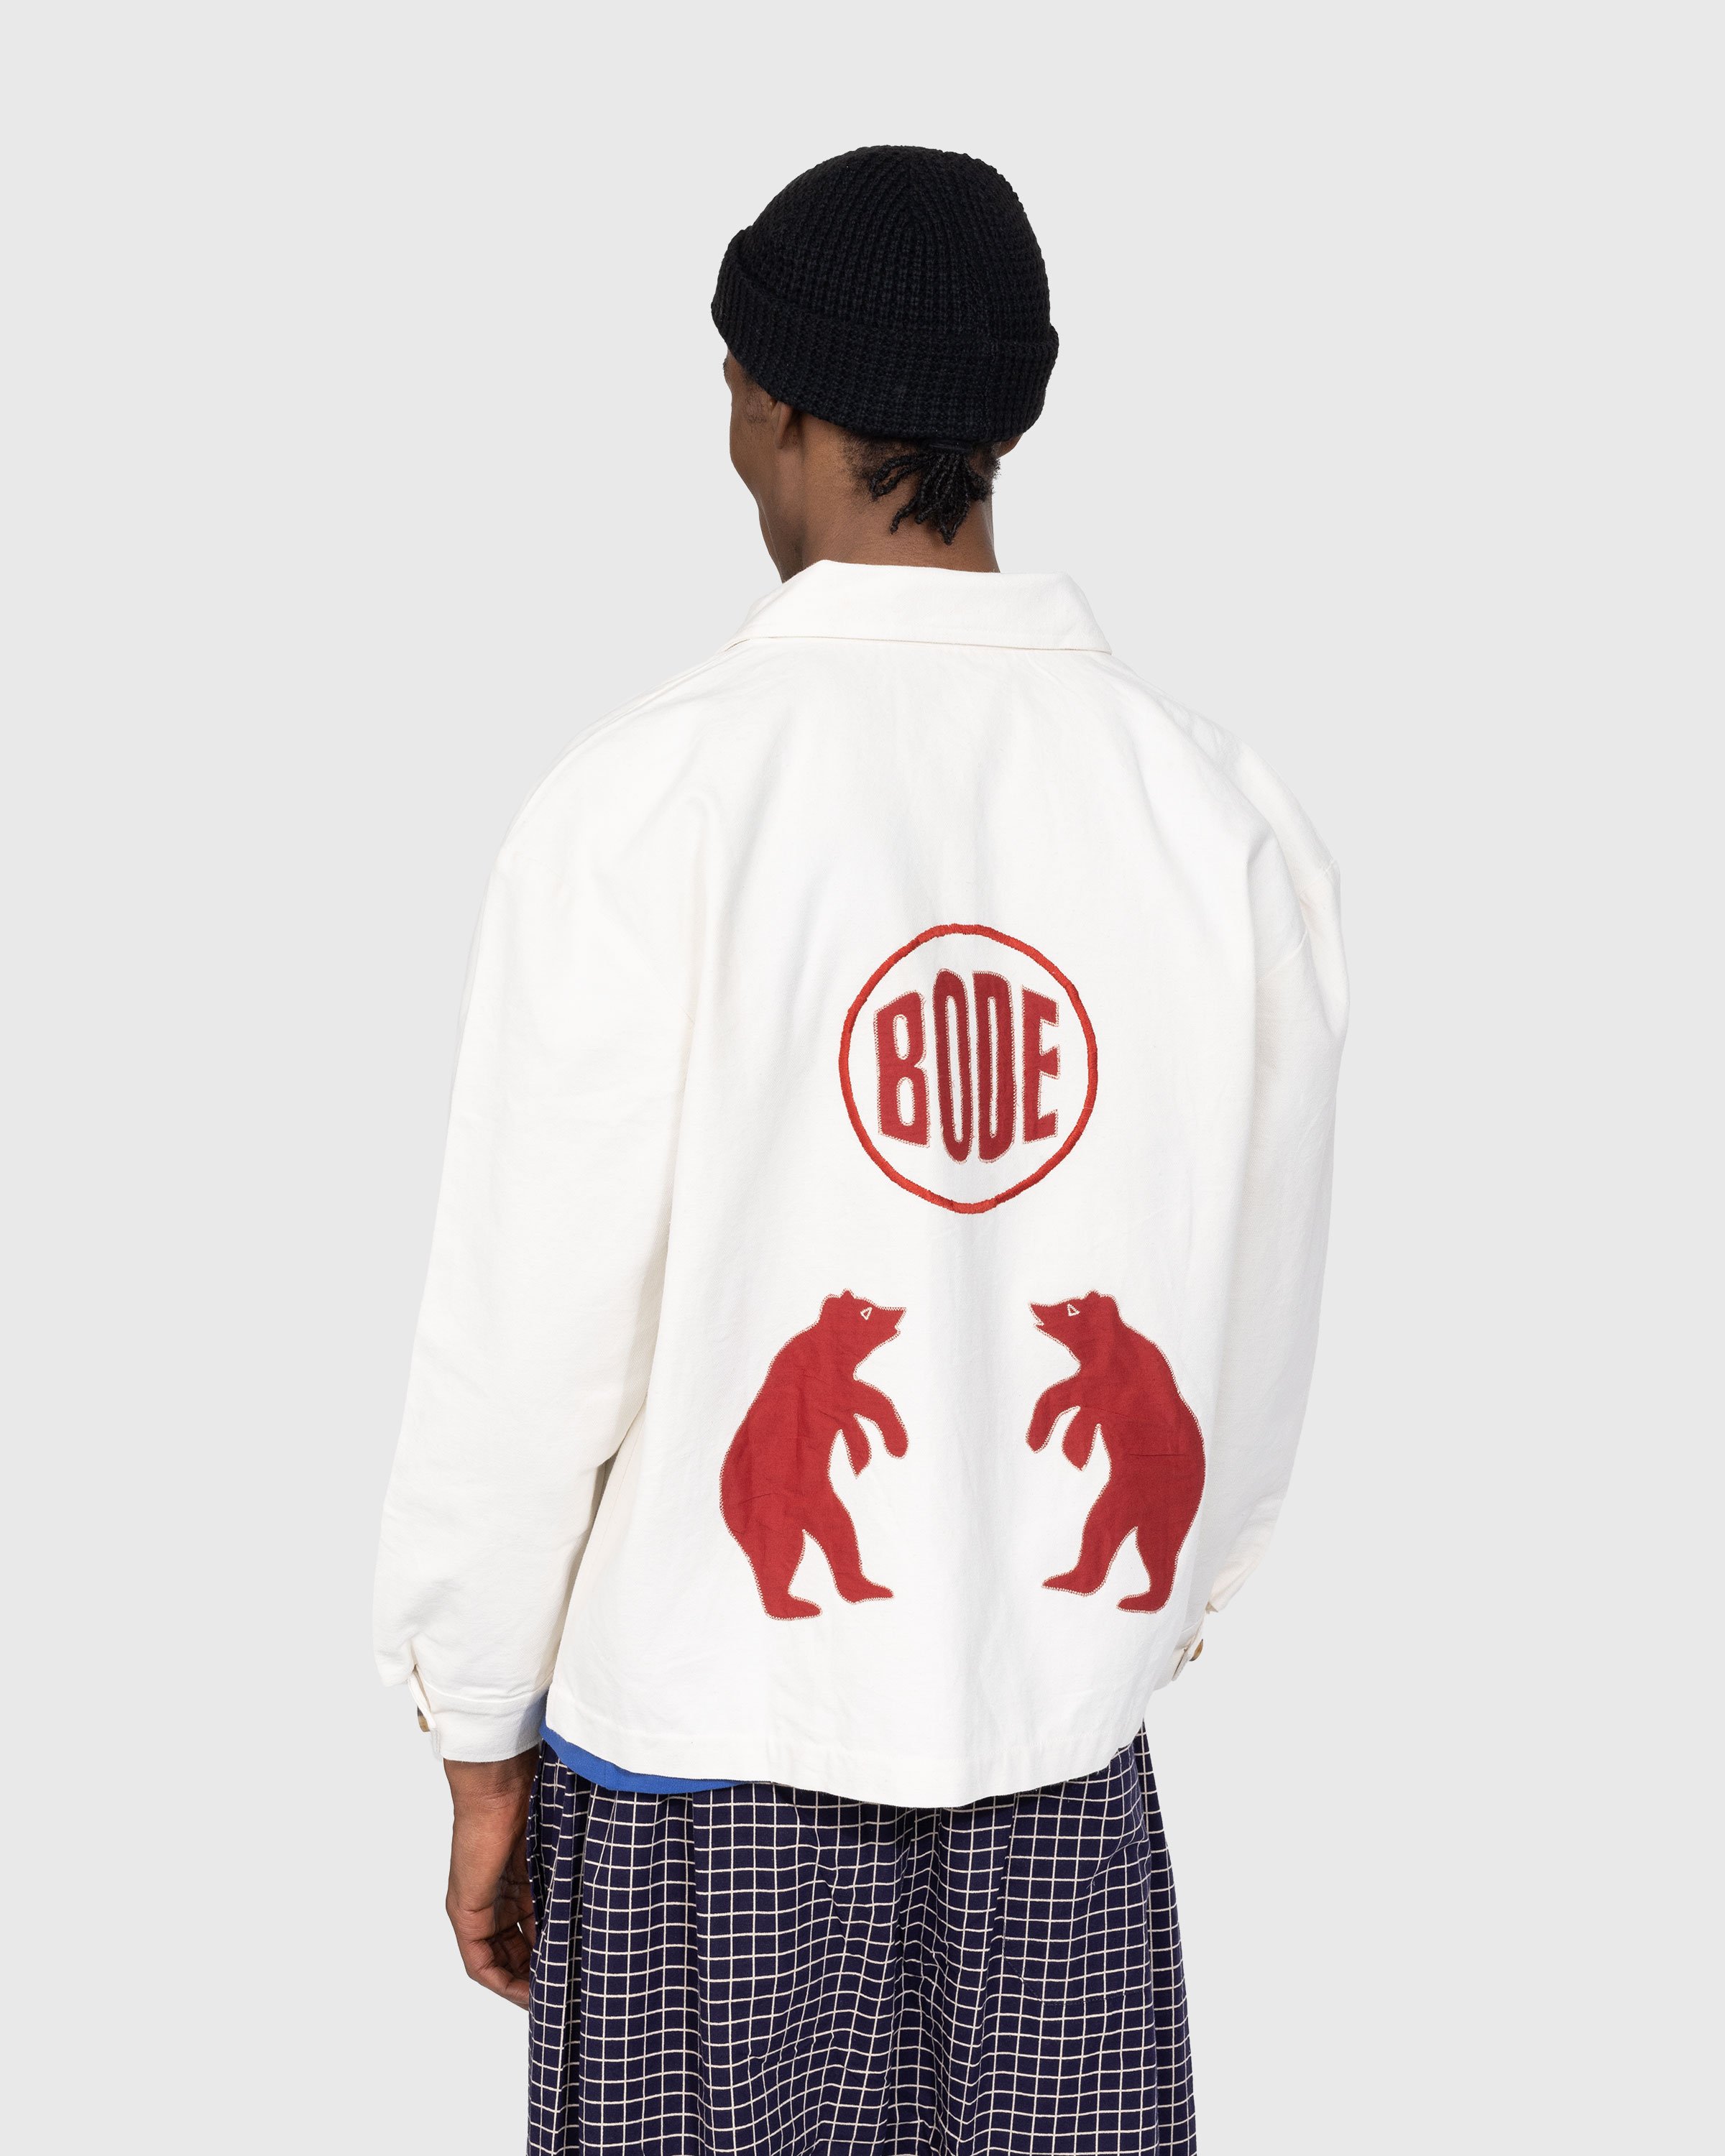 Bode - Boar Applique Jacket White/Red - Clothing - White - Image 5